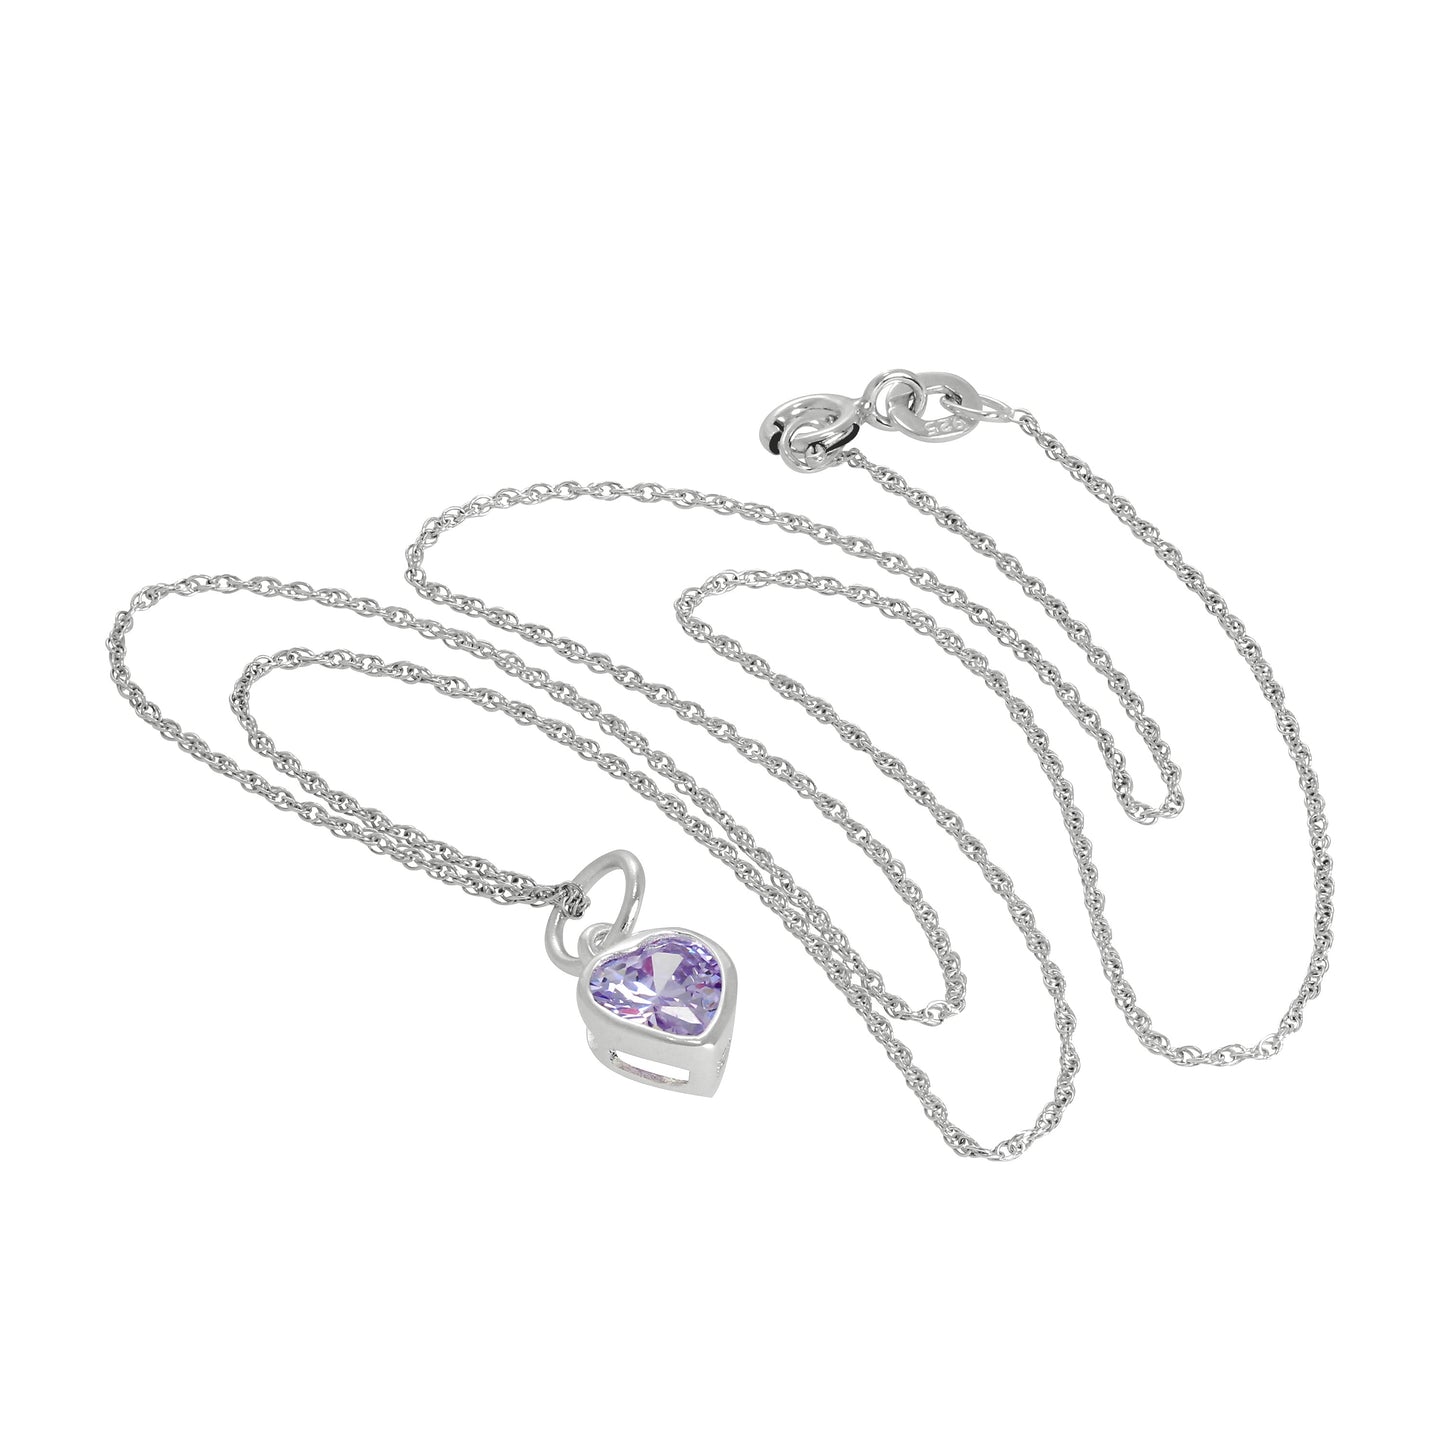 Sterling Silver Purple Heart Crystal Pendant Necklace 14 - 22 Inches